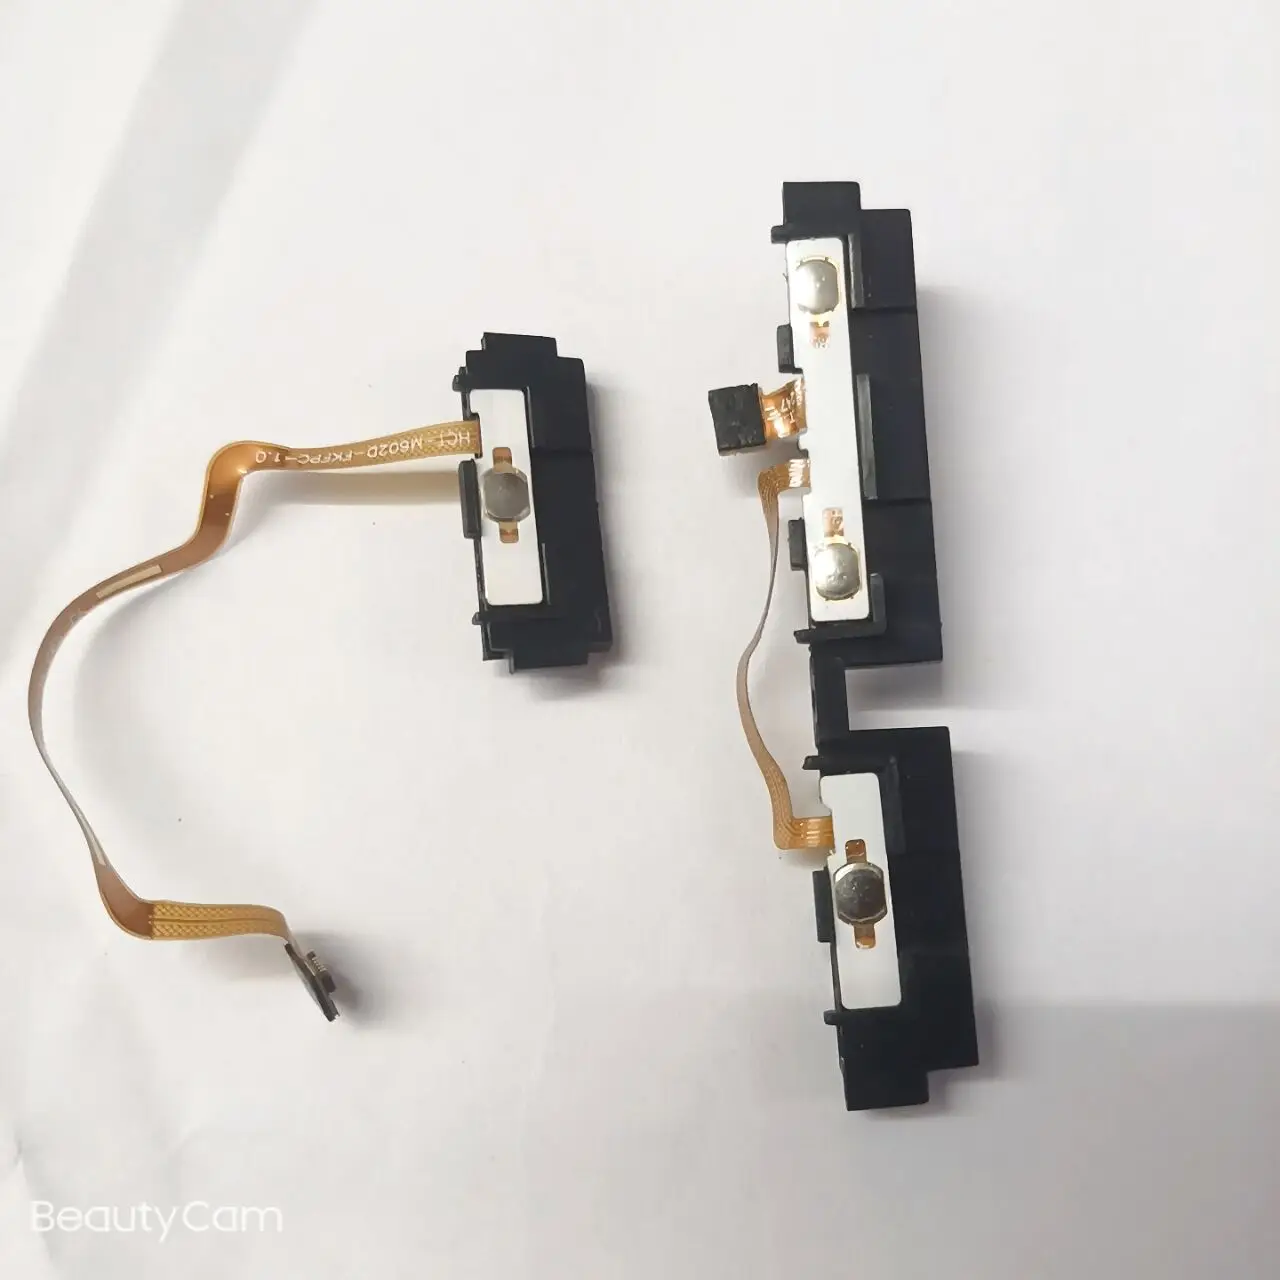 

Original oukitel WP18 volume up/down + power on/of button flex cable FPC for oukitel WP18 smart cell phone + tracking number